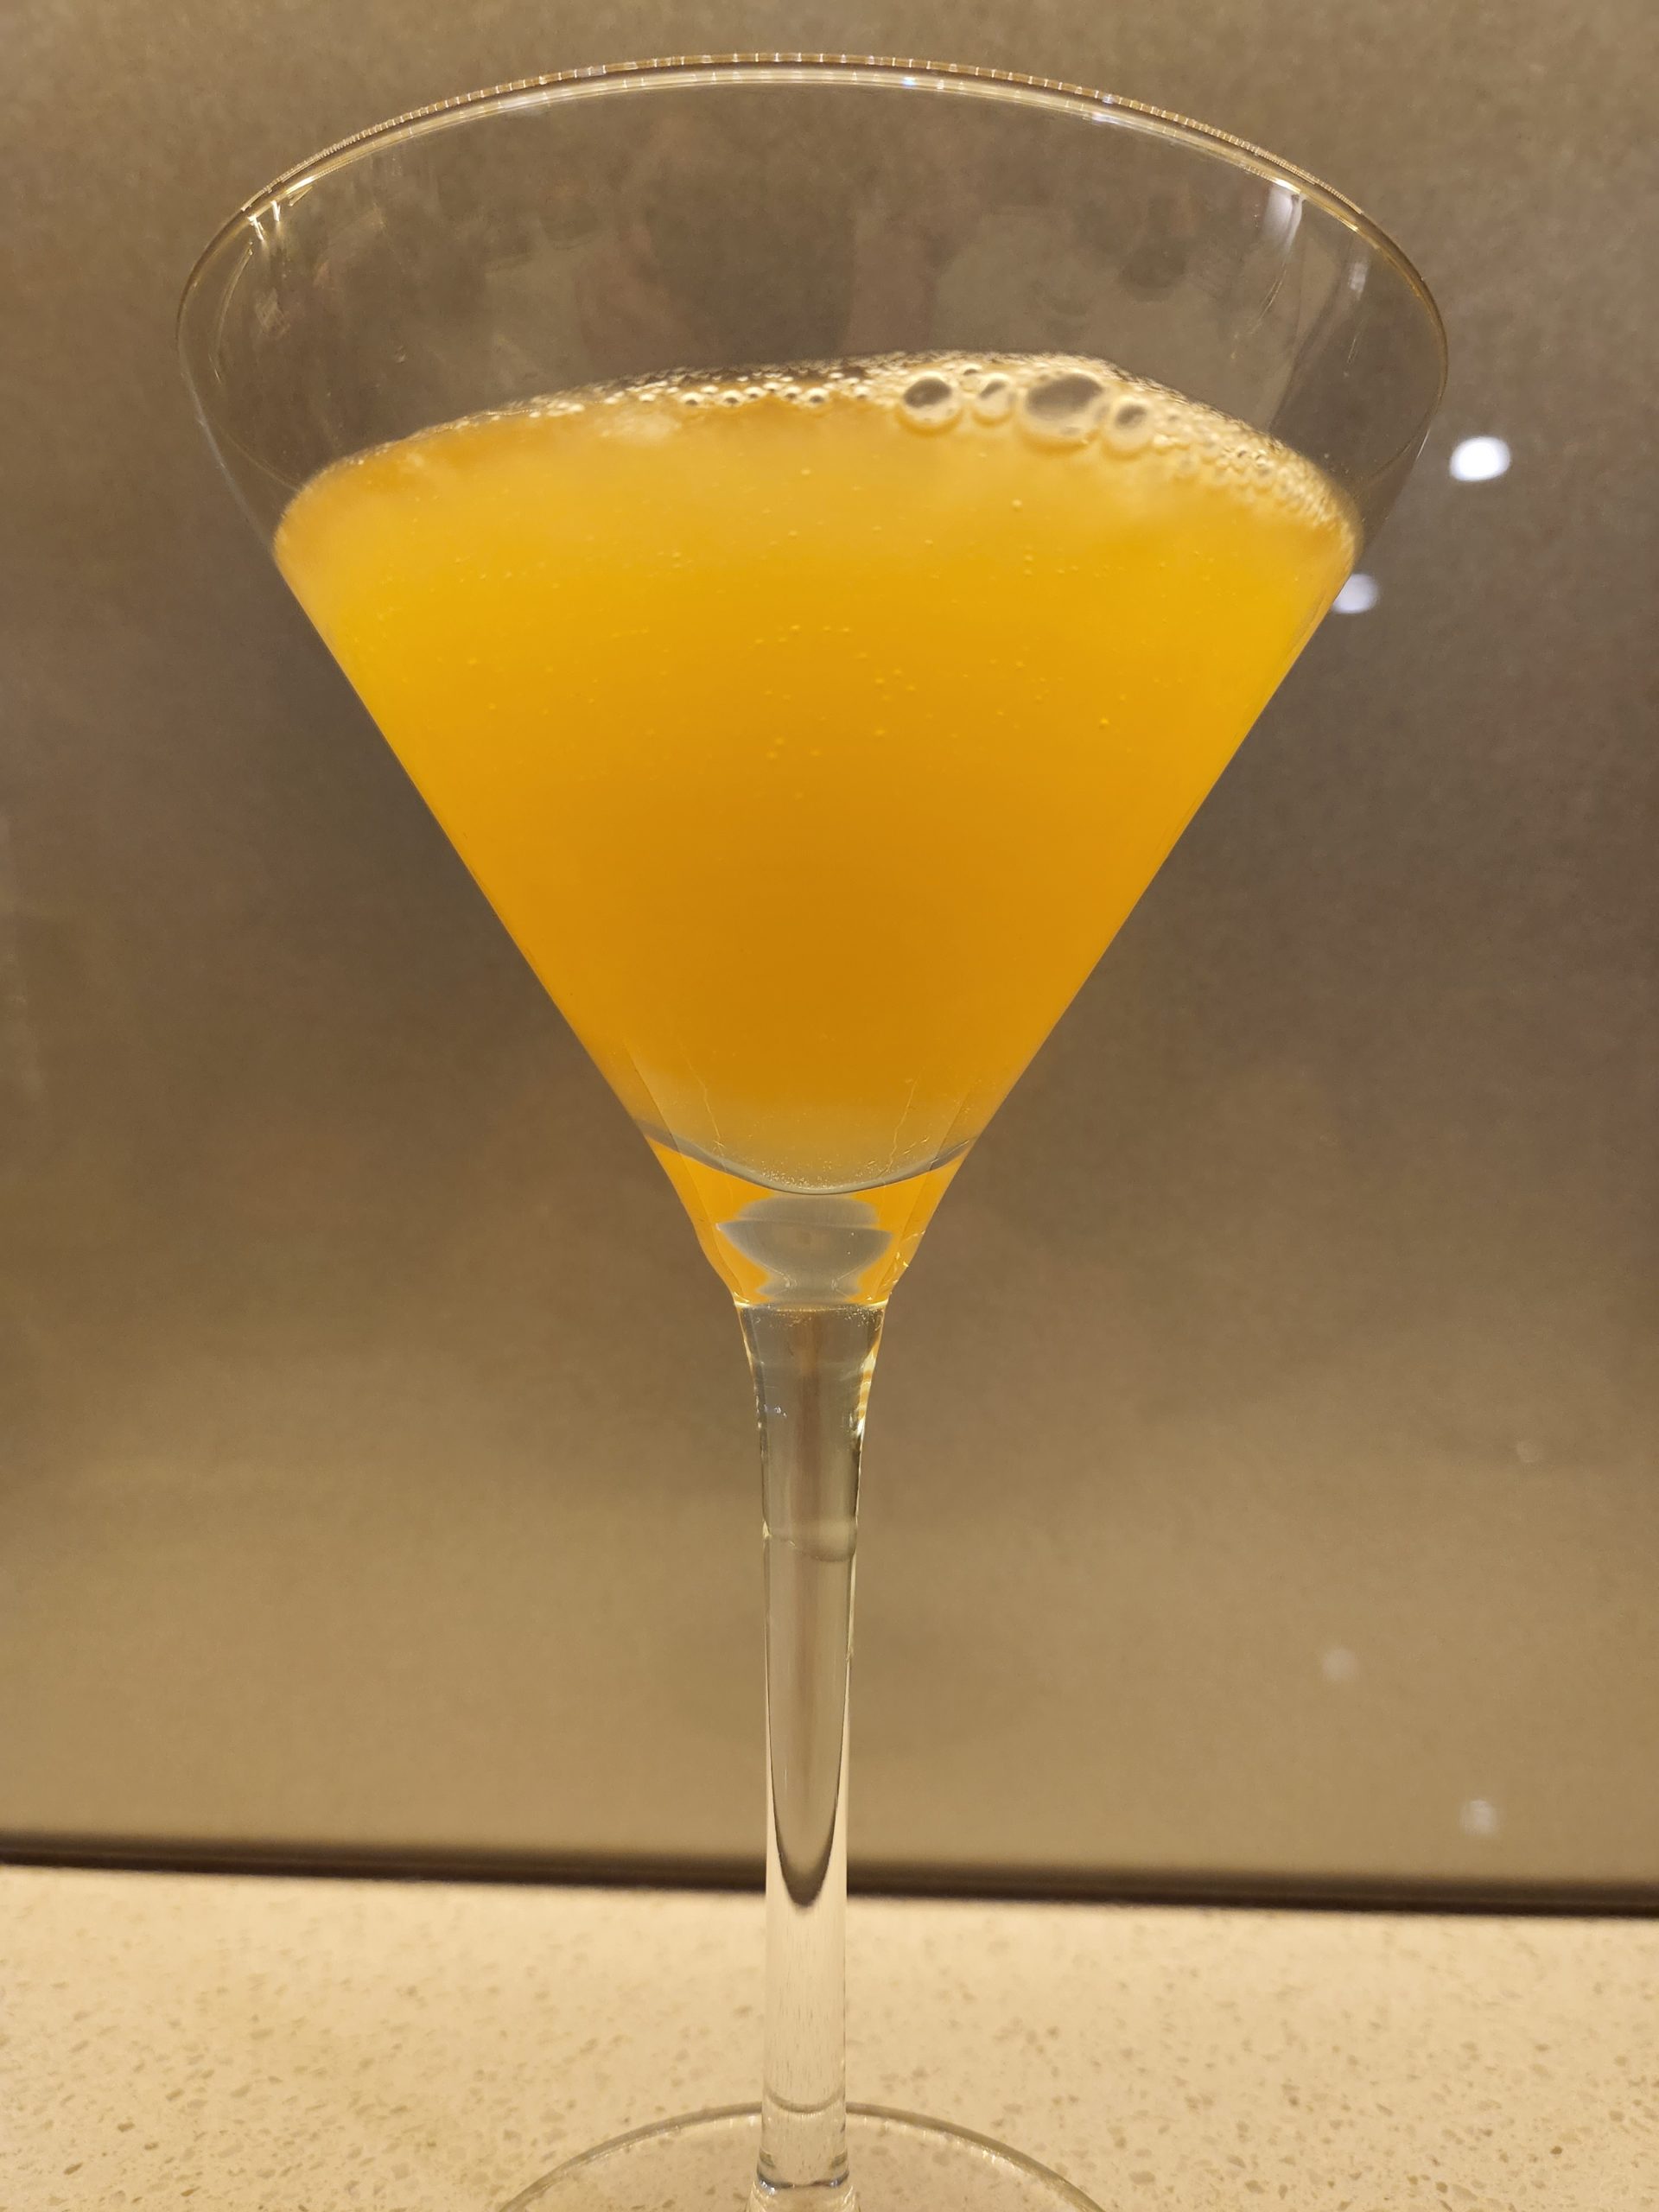 A Downhill Racer cocktail.